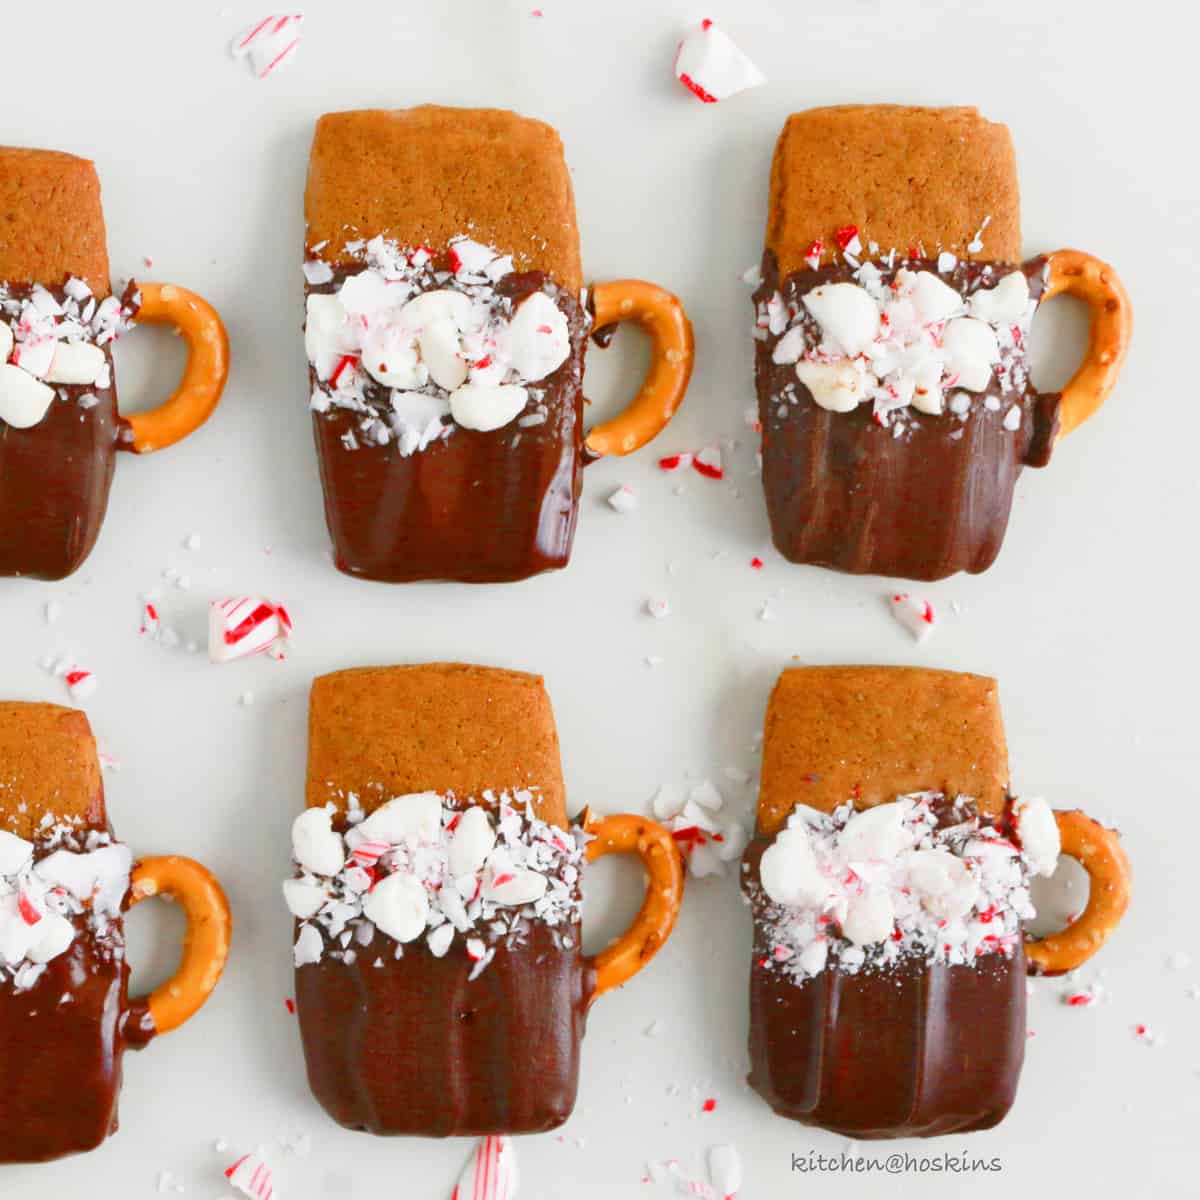 https://www.kitchenathoskins.com/wp-content/uploads/2017/12/gingerbread-cookie-cocoa-cup-2@yum.jpg